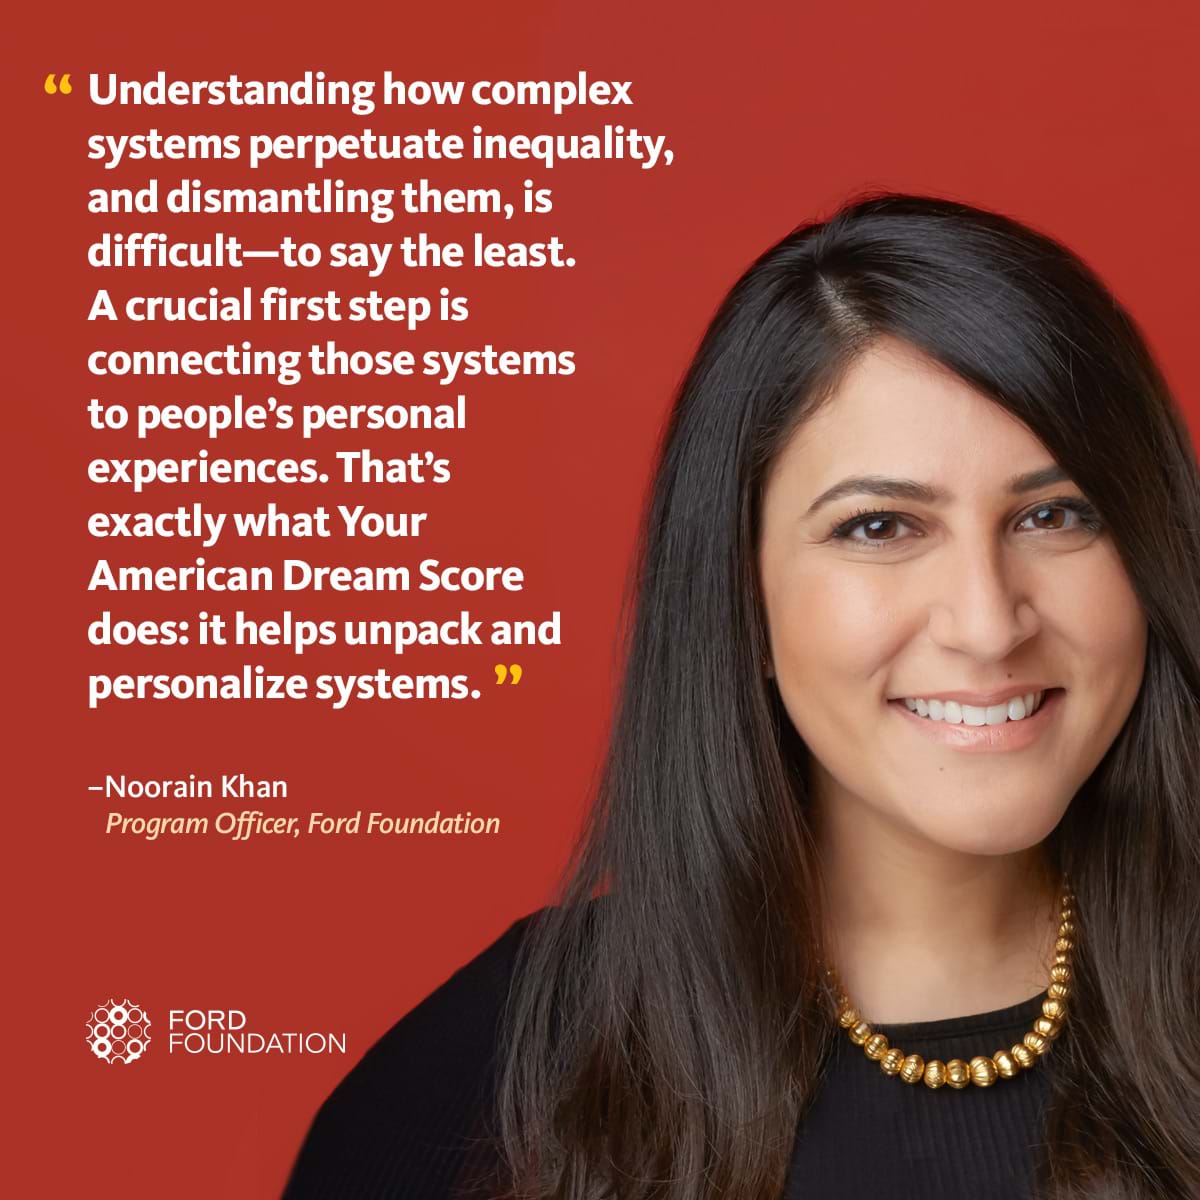 Photo of Noorain Kahn with a quote about her American Dream Score